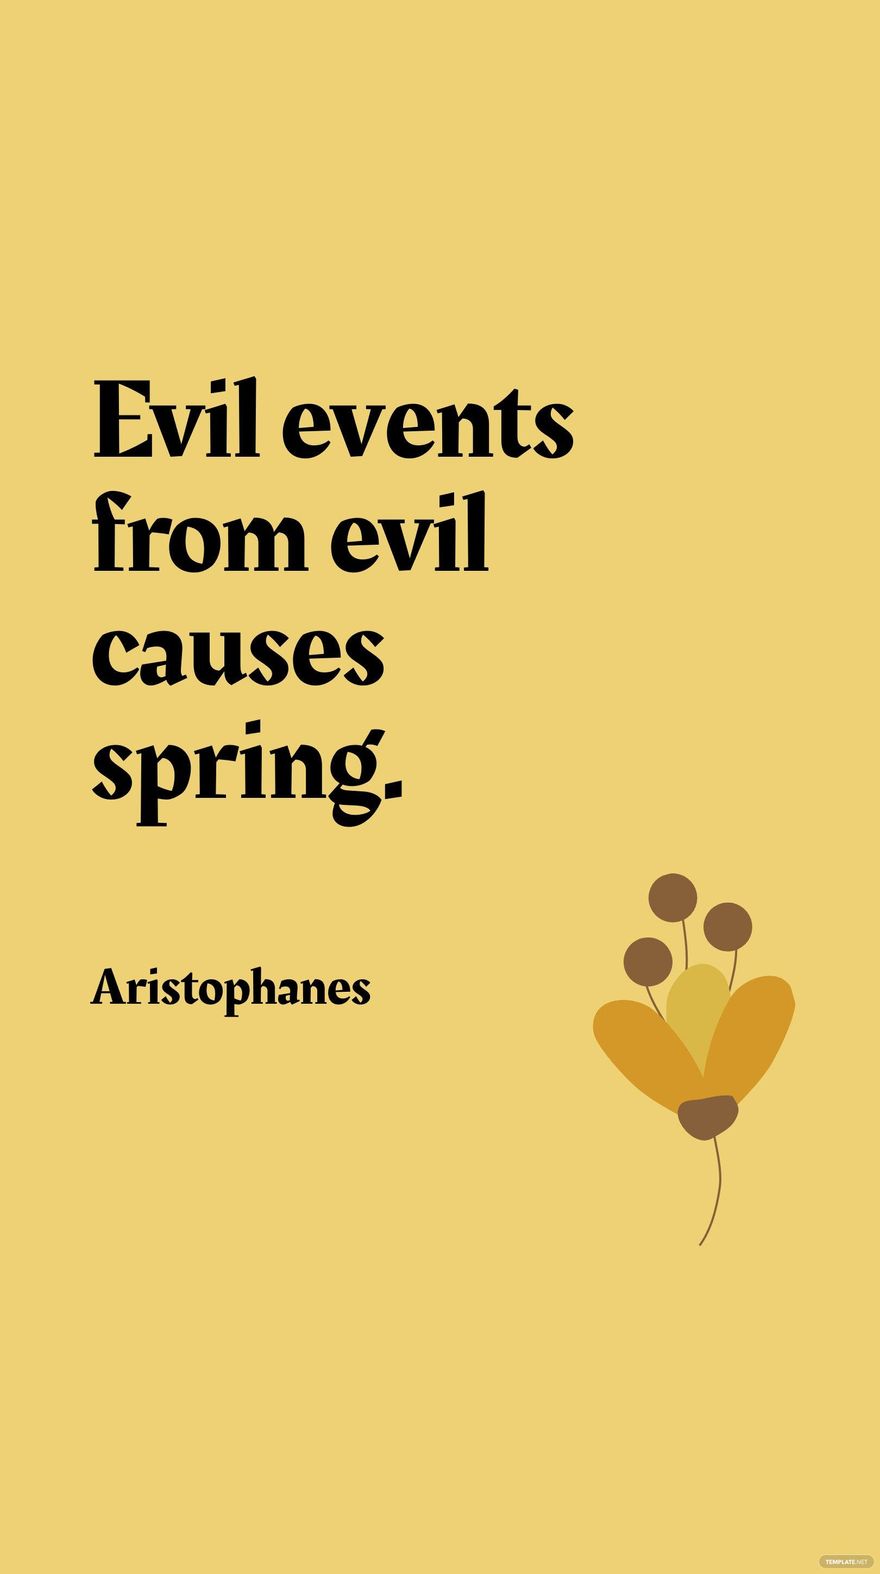 Free Aristophanes - Evil events from evil causes spring. in JPG